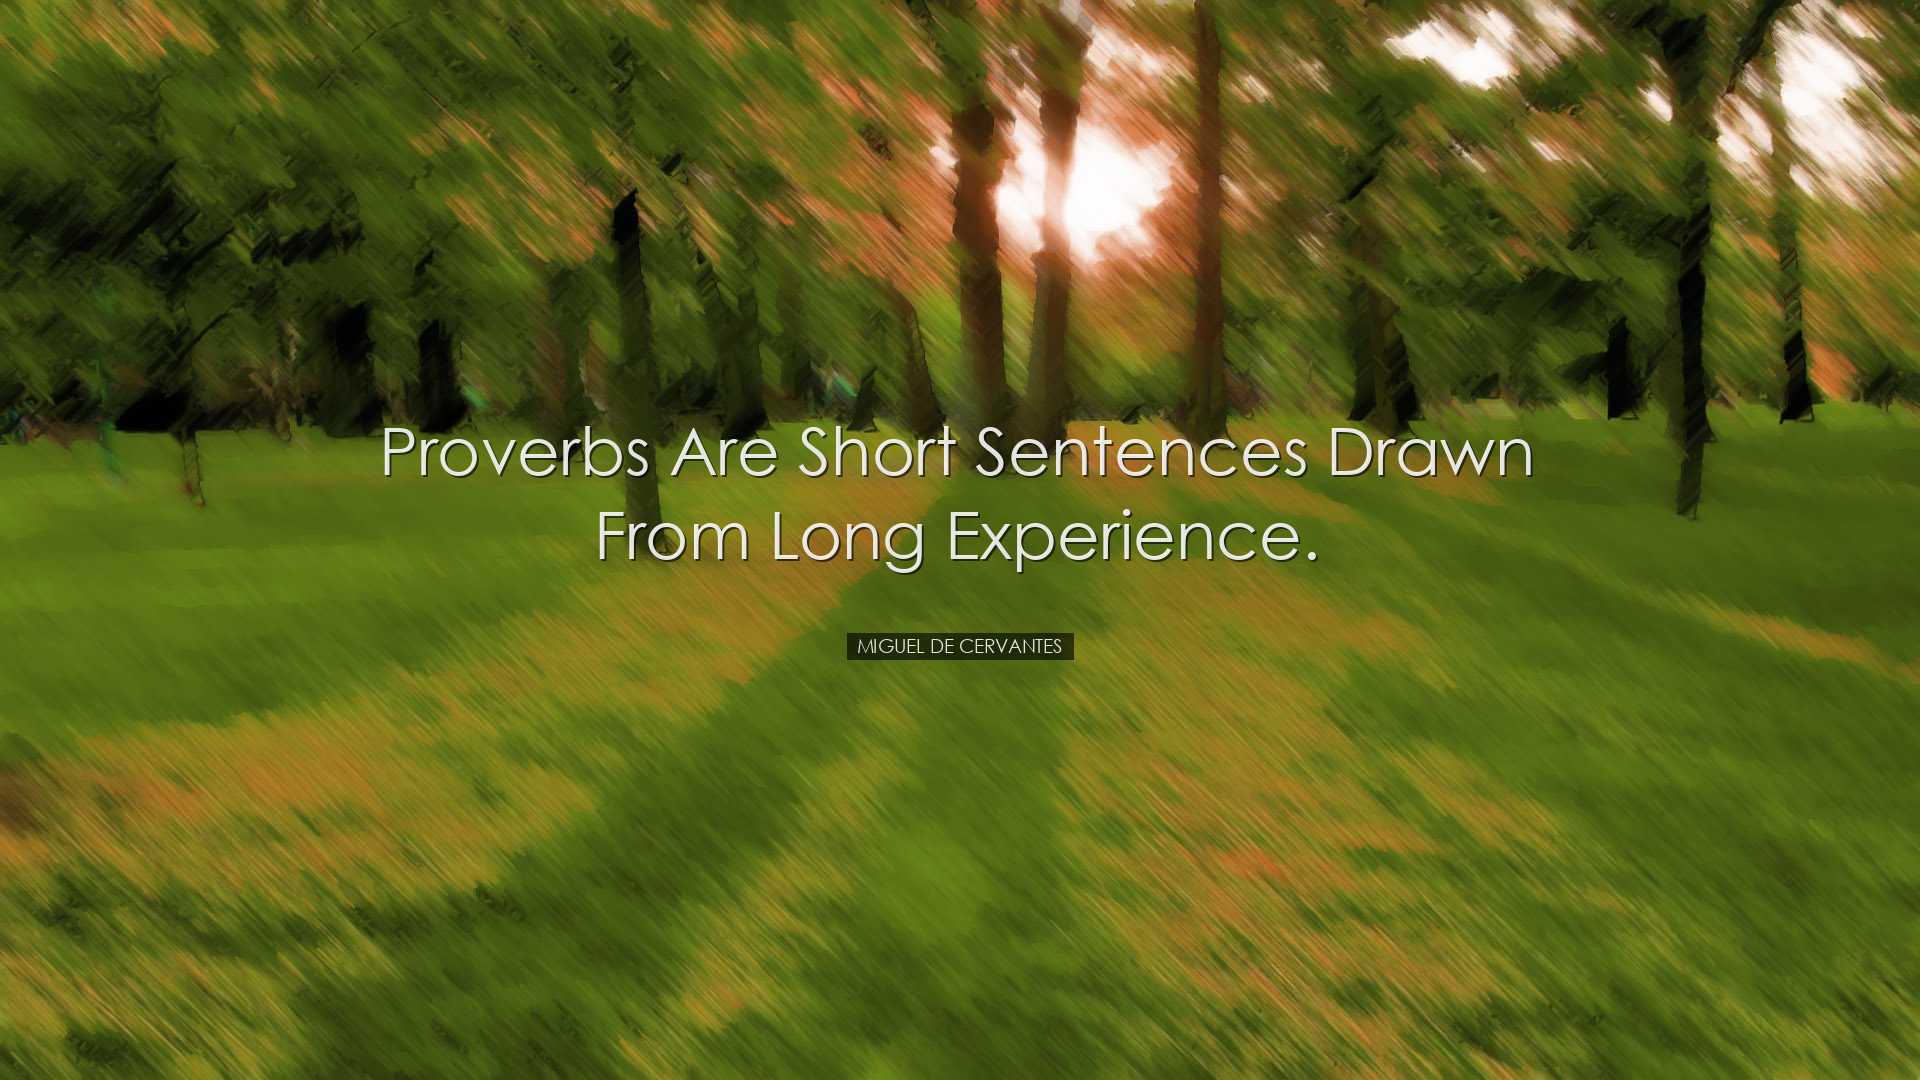 Proverbs are short sentences drawn from long experience. - Miguel